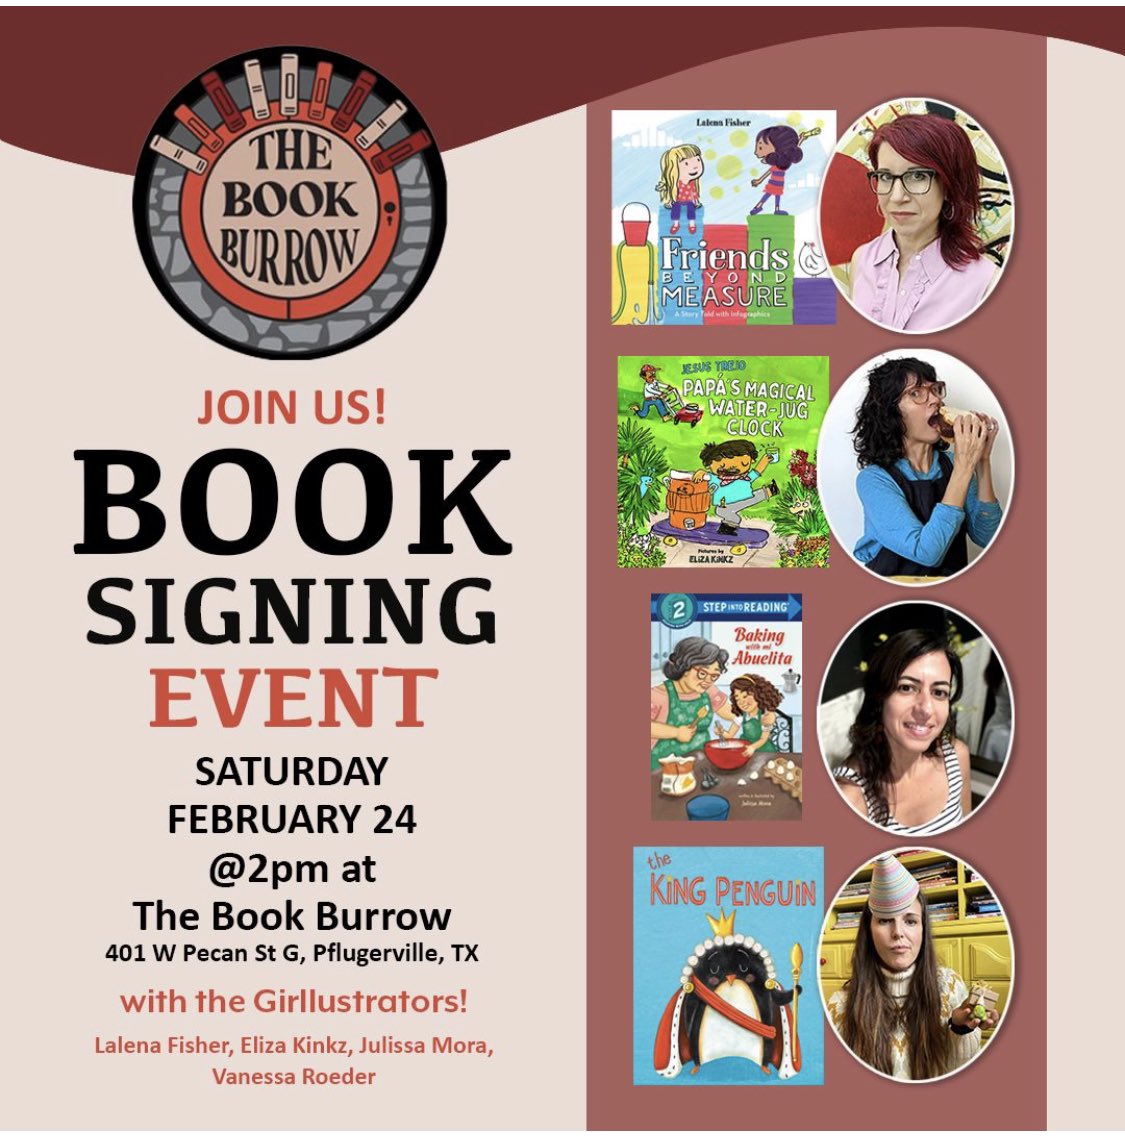 Near Pflugerville? Been to the charming Book Burrow? Come out on Saturday and join us Girllustrators for drawing activities and book signings! @LalenaFisher @elizakinkz @JulissaMora @nessadeeart hope to see you!